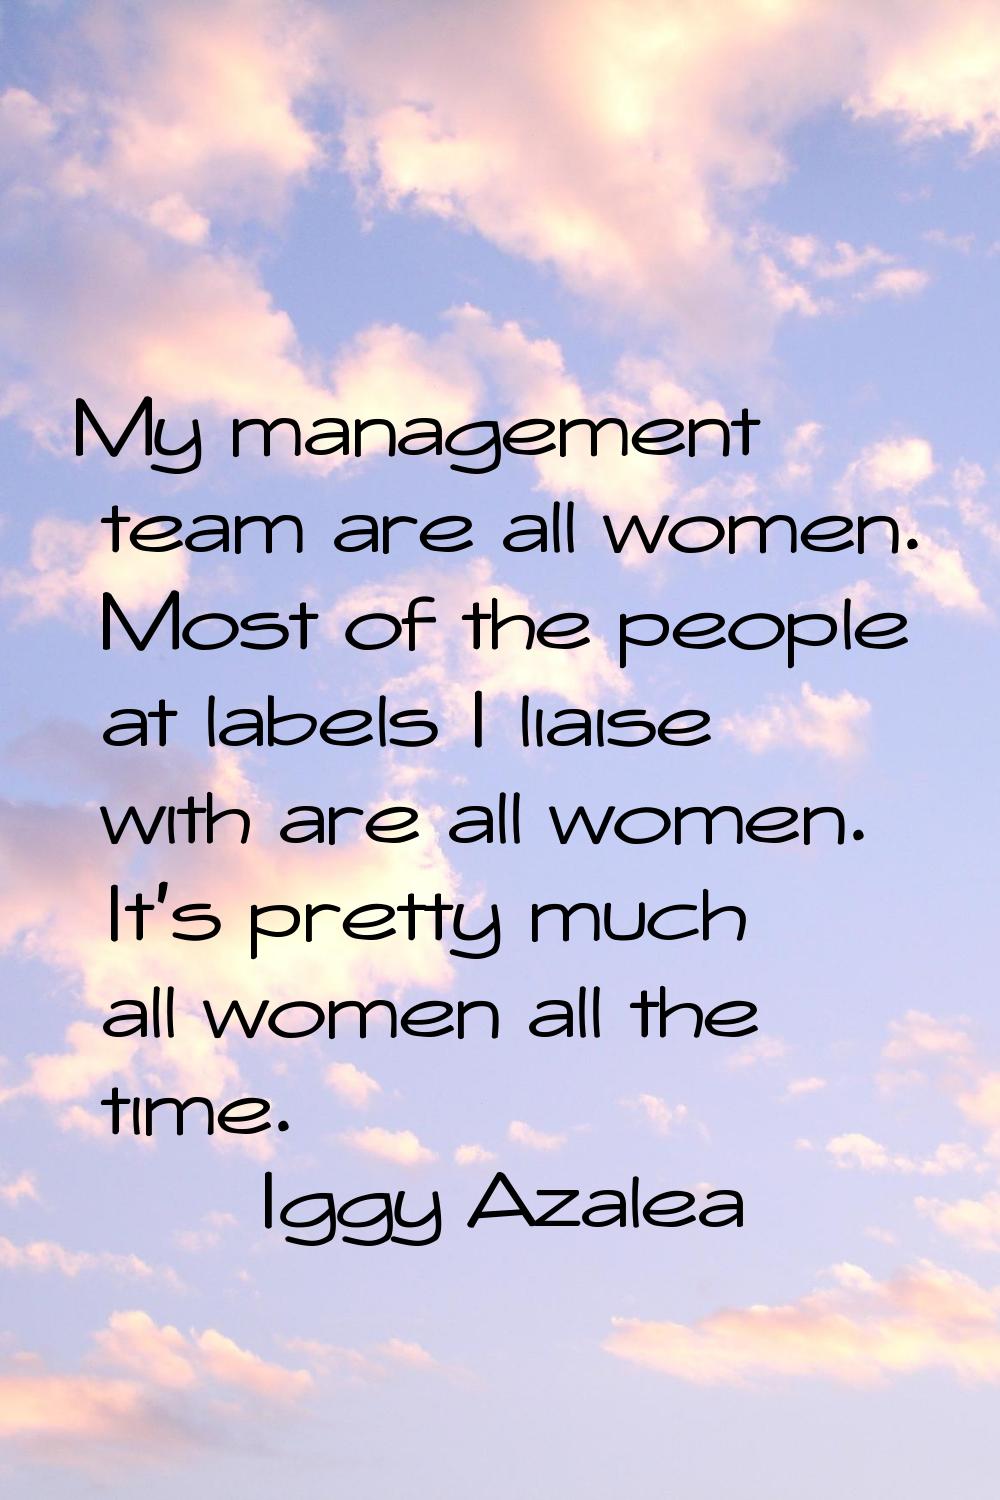 My management team are all women. Most of the people at labels I liaise with are all women. It's pr